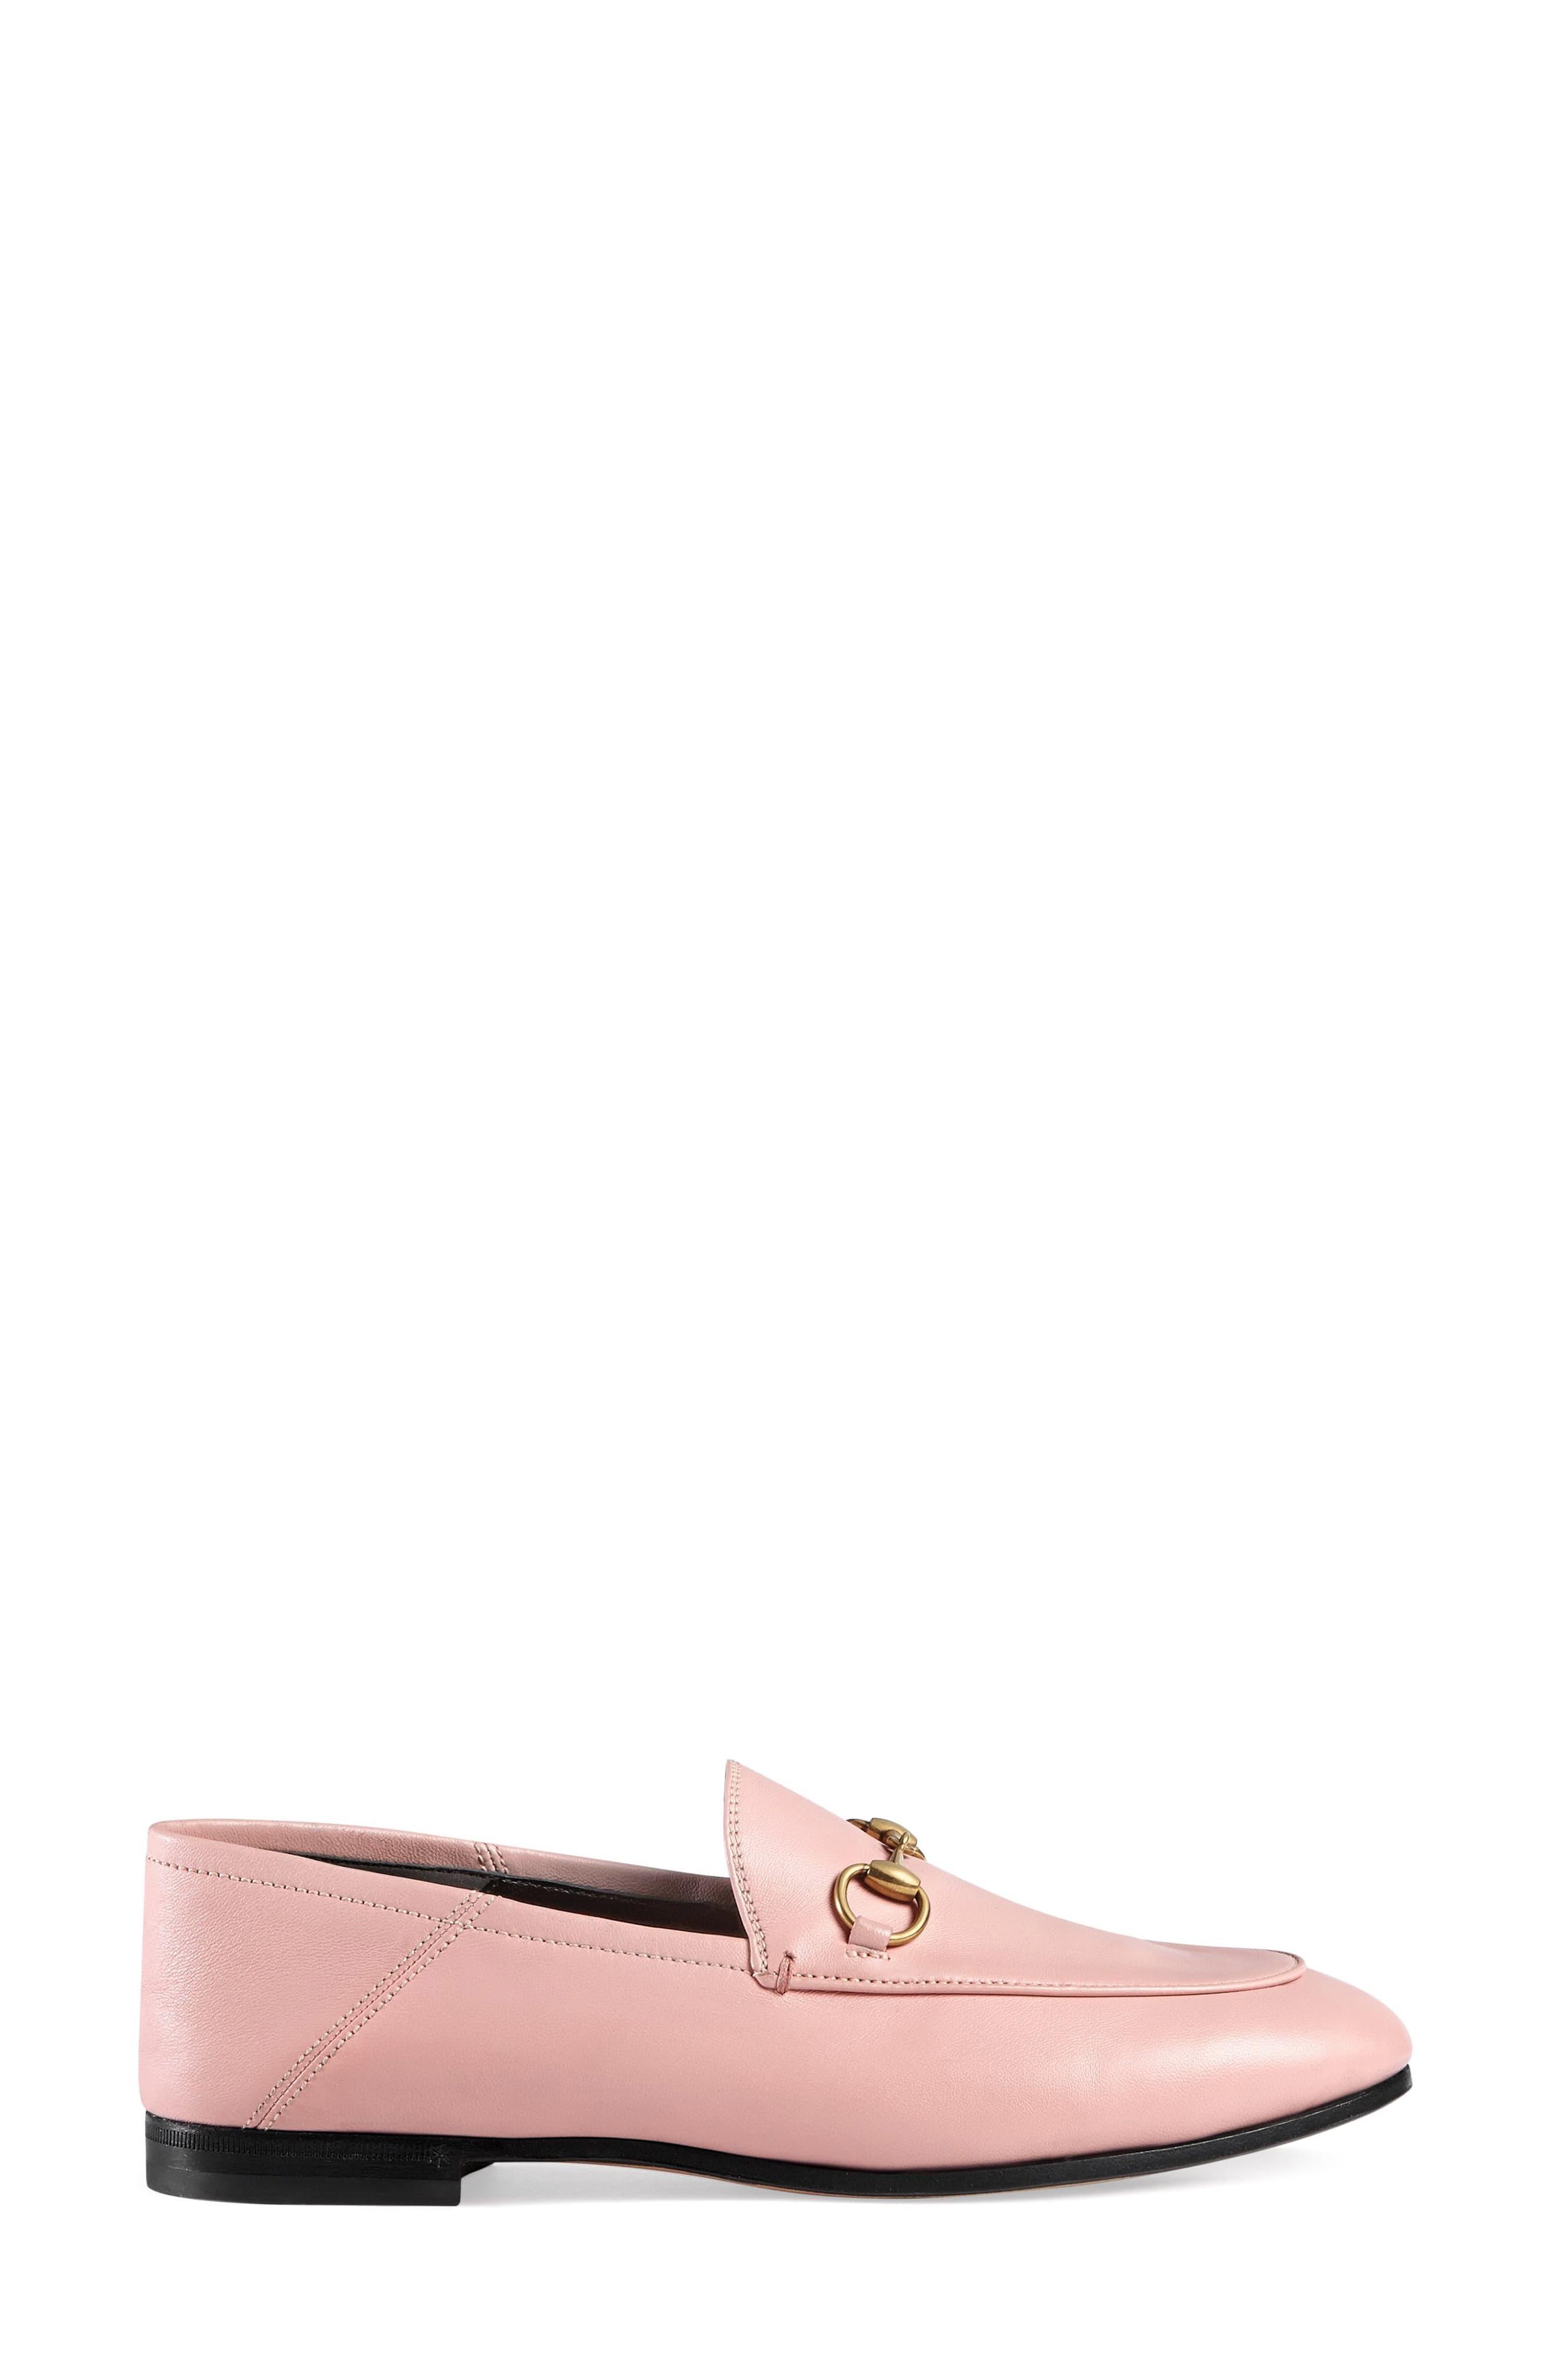 Gucci Brixton Leather Loafers in Light Pink Leather (Pink) - Save 37% ...